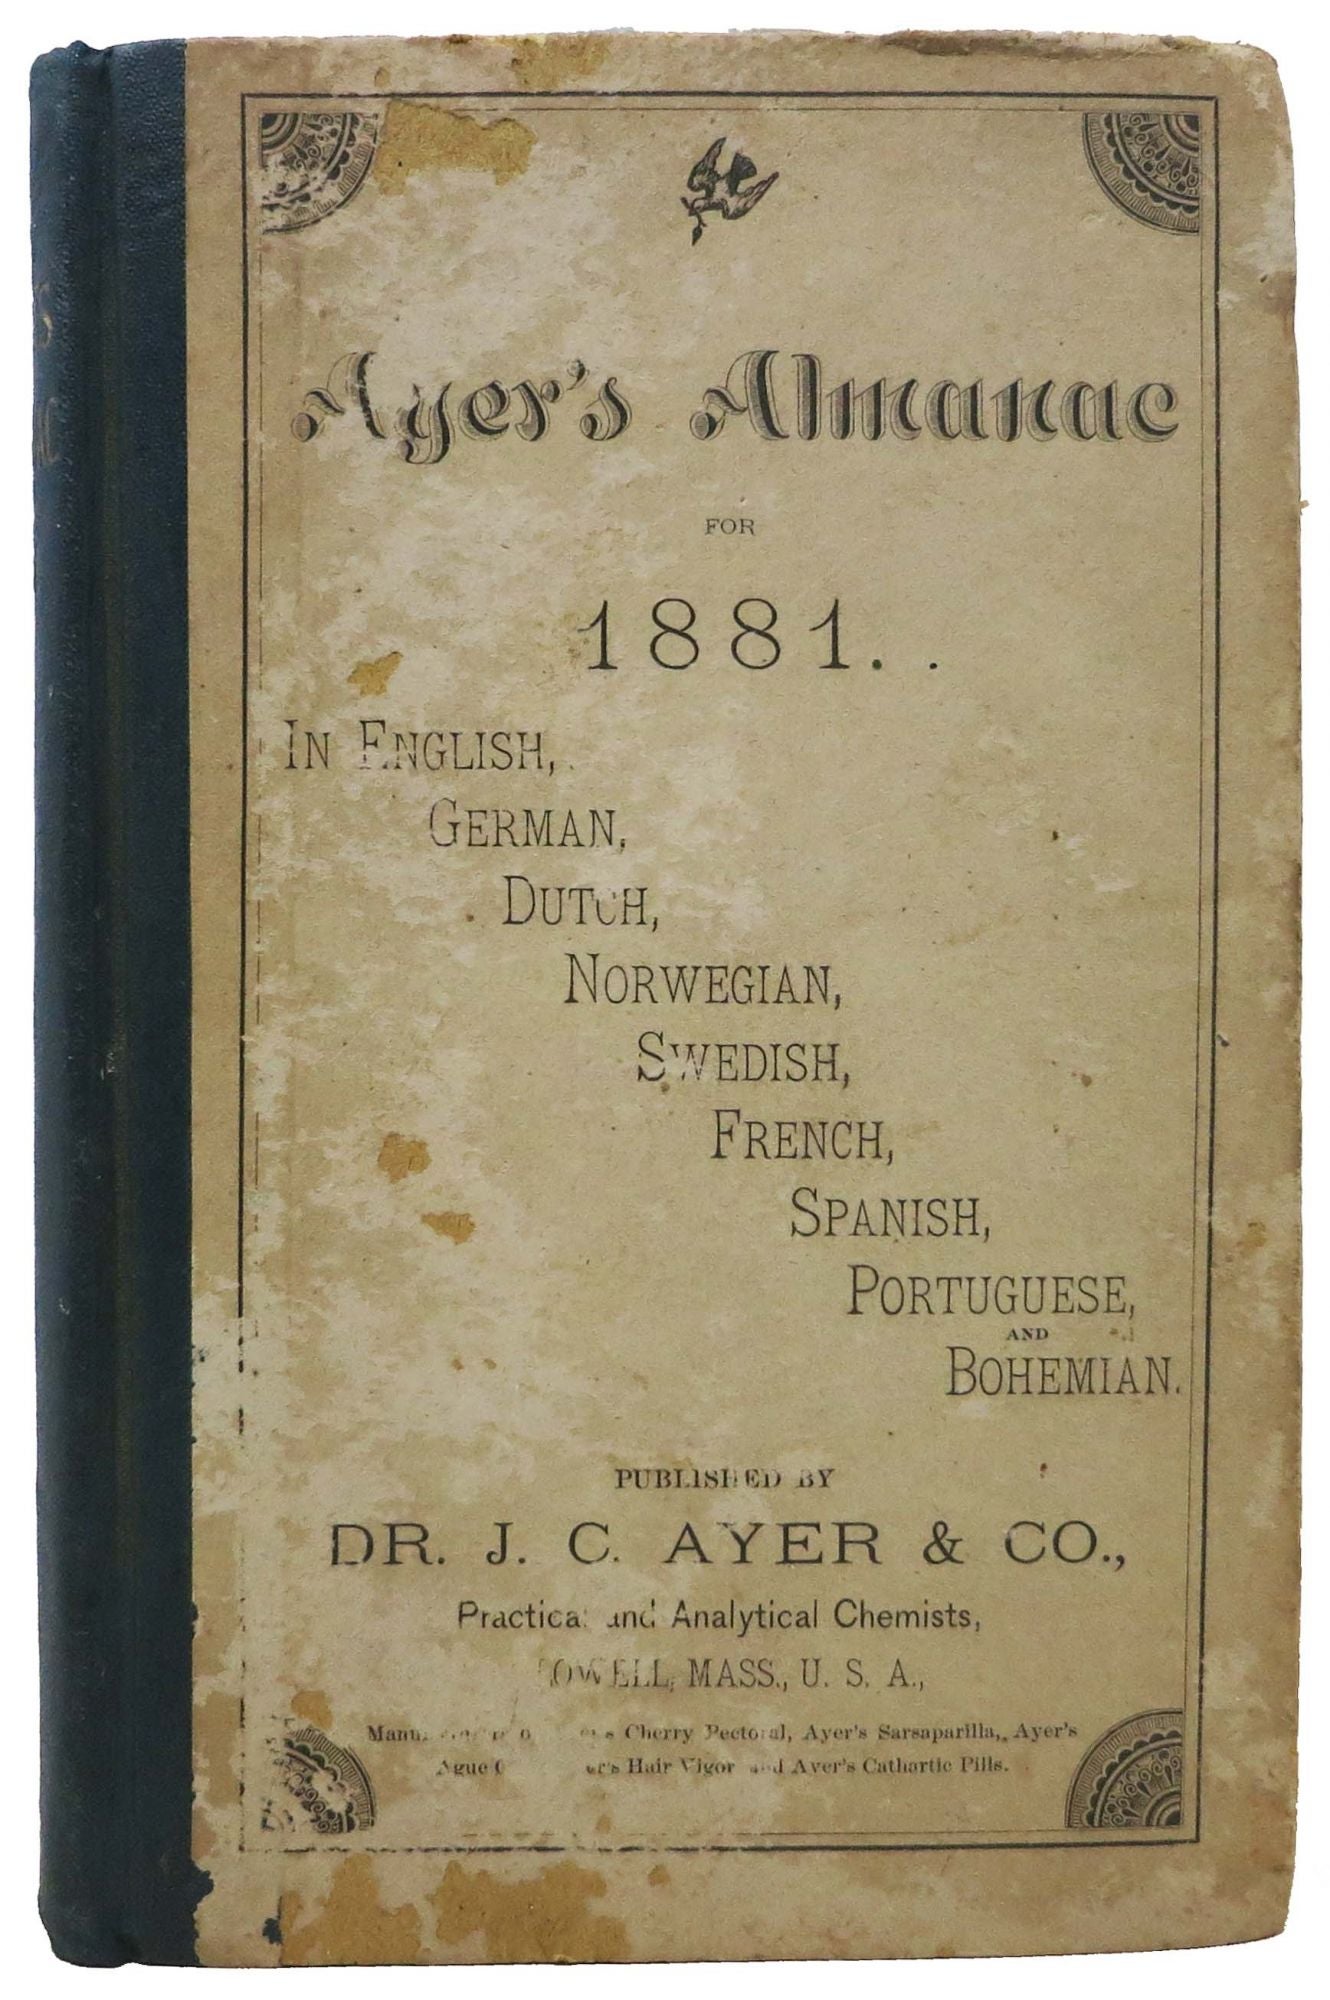 [Specimen Book]. Ayer, Dr. J[ames]. C. [1818 - 1878] - AYER'S ALMANAC For 1881.; In English, German, Dutch, Norwegian, Swedish, French, Spanish, Portugese, and Bohemian